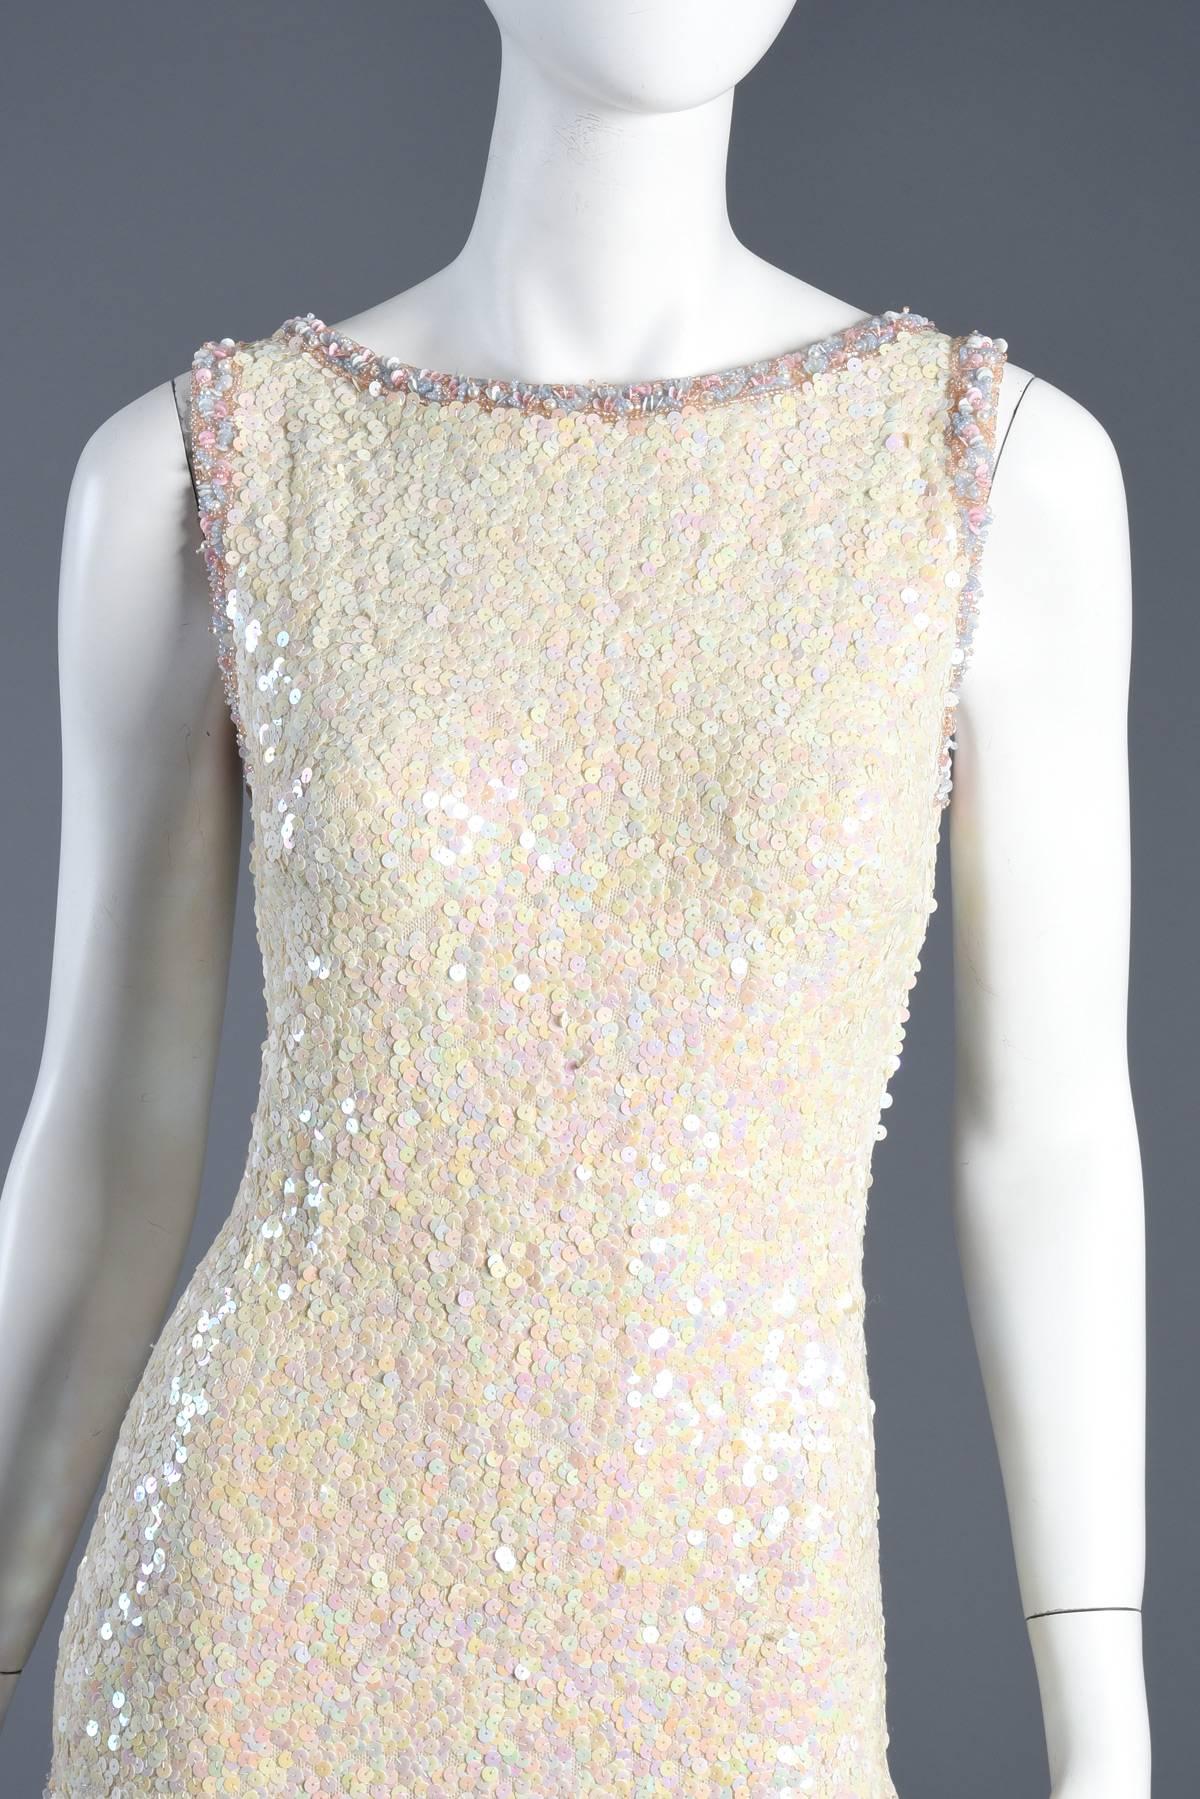 Pastel Striped Sequin Encrusted Knit Wool Cocktail Dress In Excellent Condition For Sale In Yucca Valley, CA